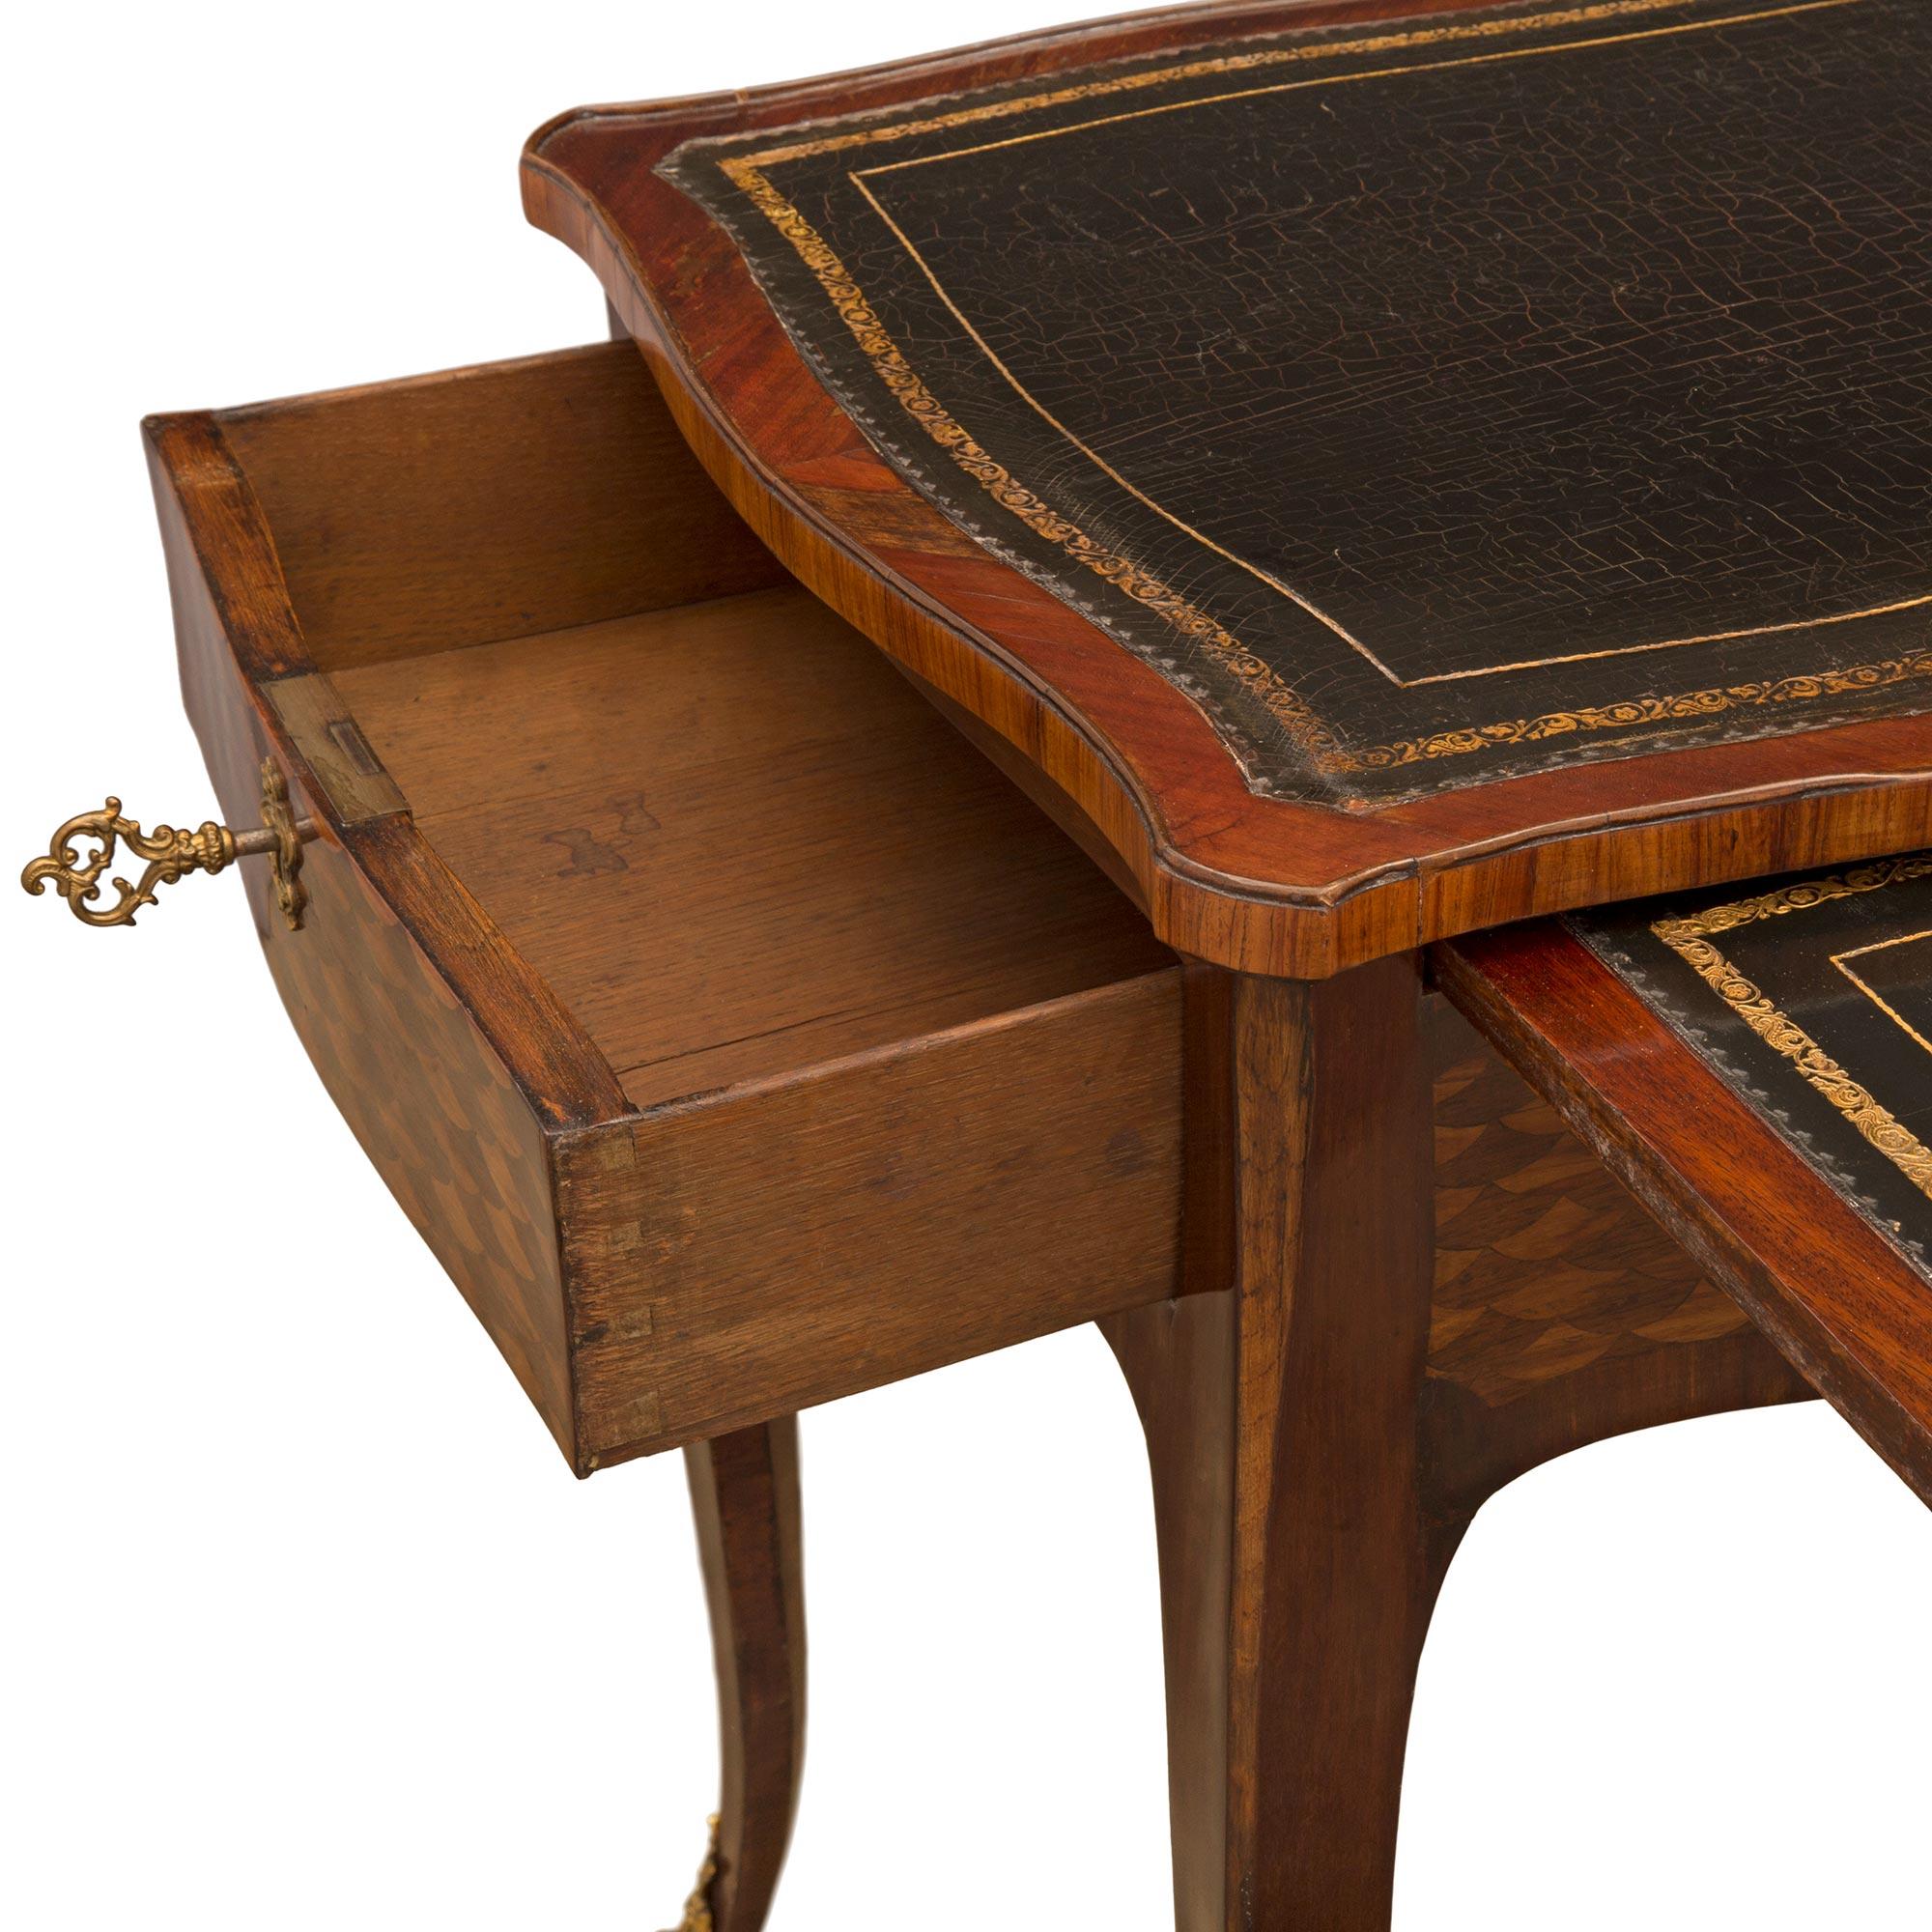 French 18th Century Louis XV Period Kingwood And Tulipwood Desk For Sale 1